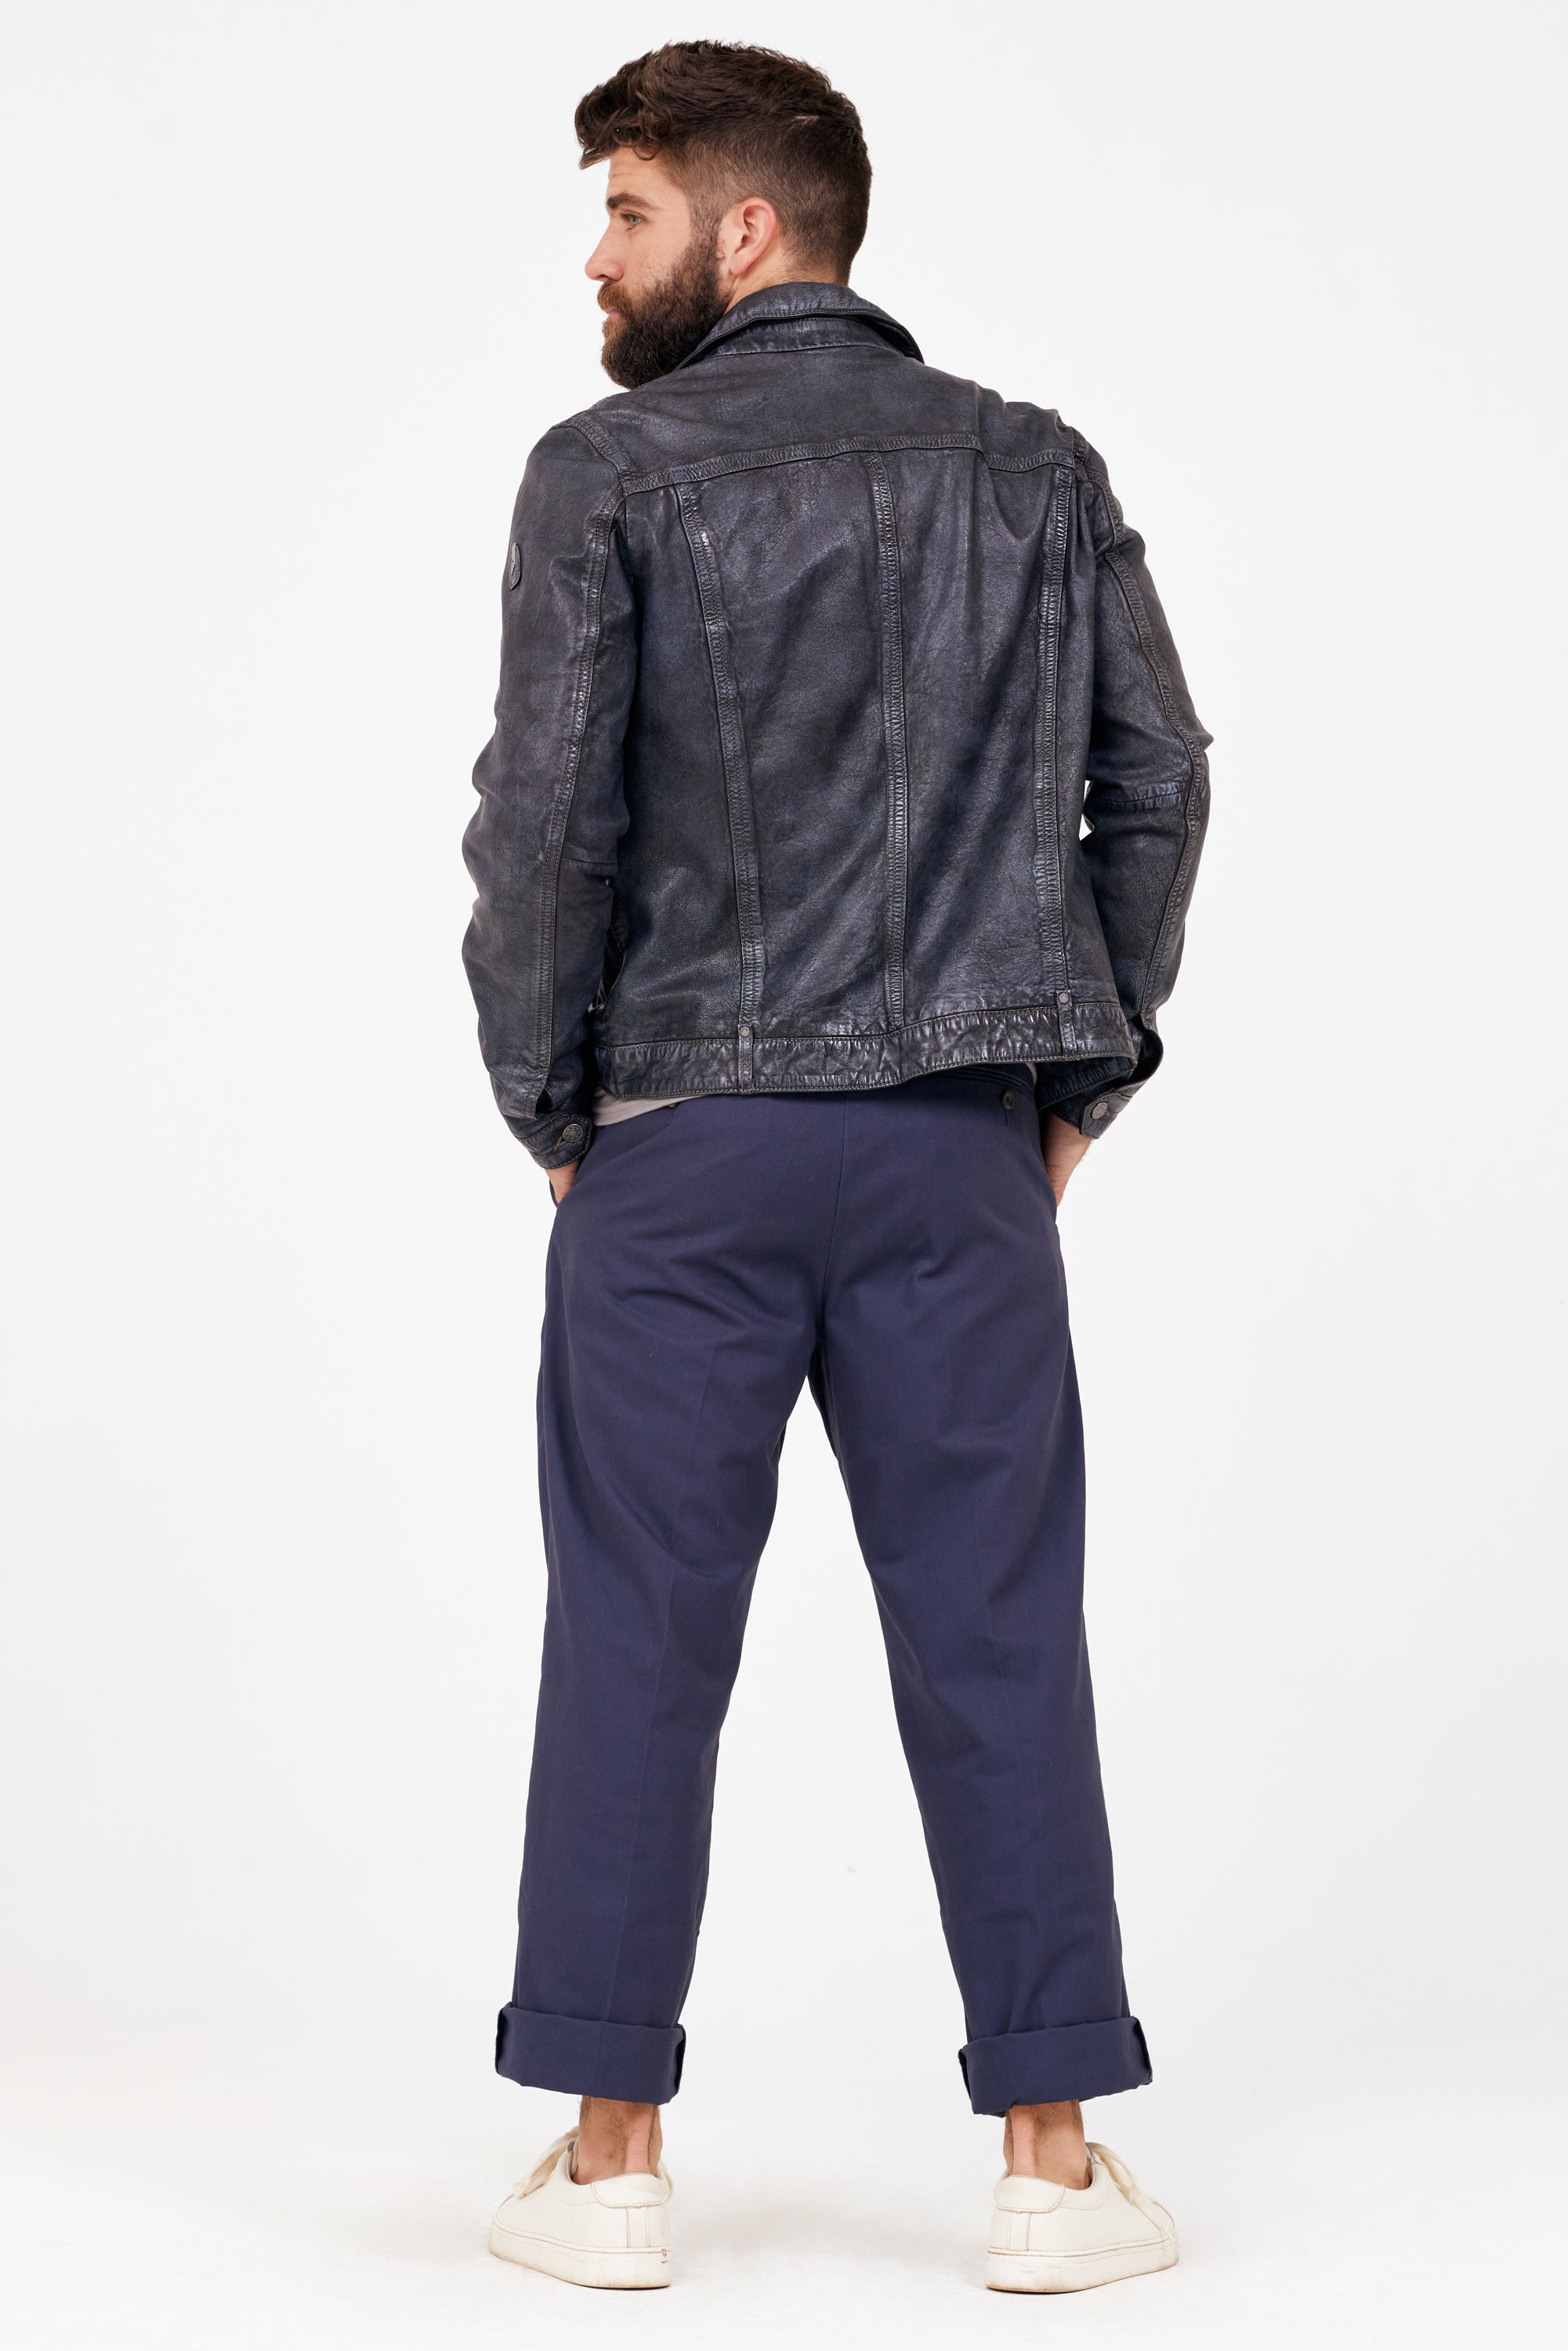 Geoff RF Leather Jacket, – mauritiusleather Anthracite-Blue